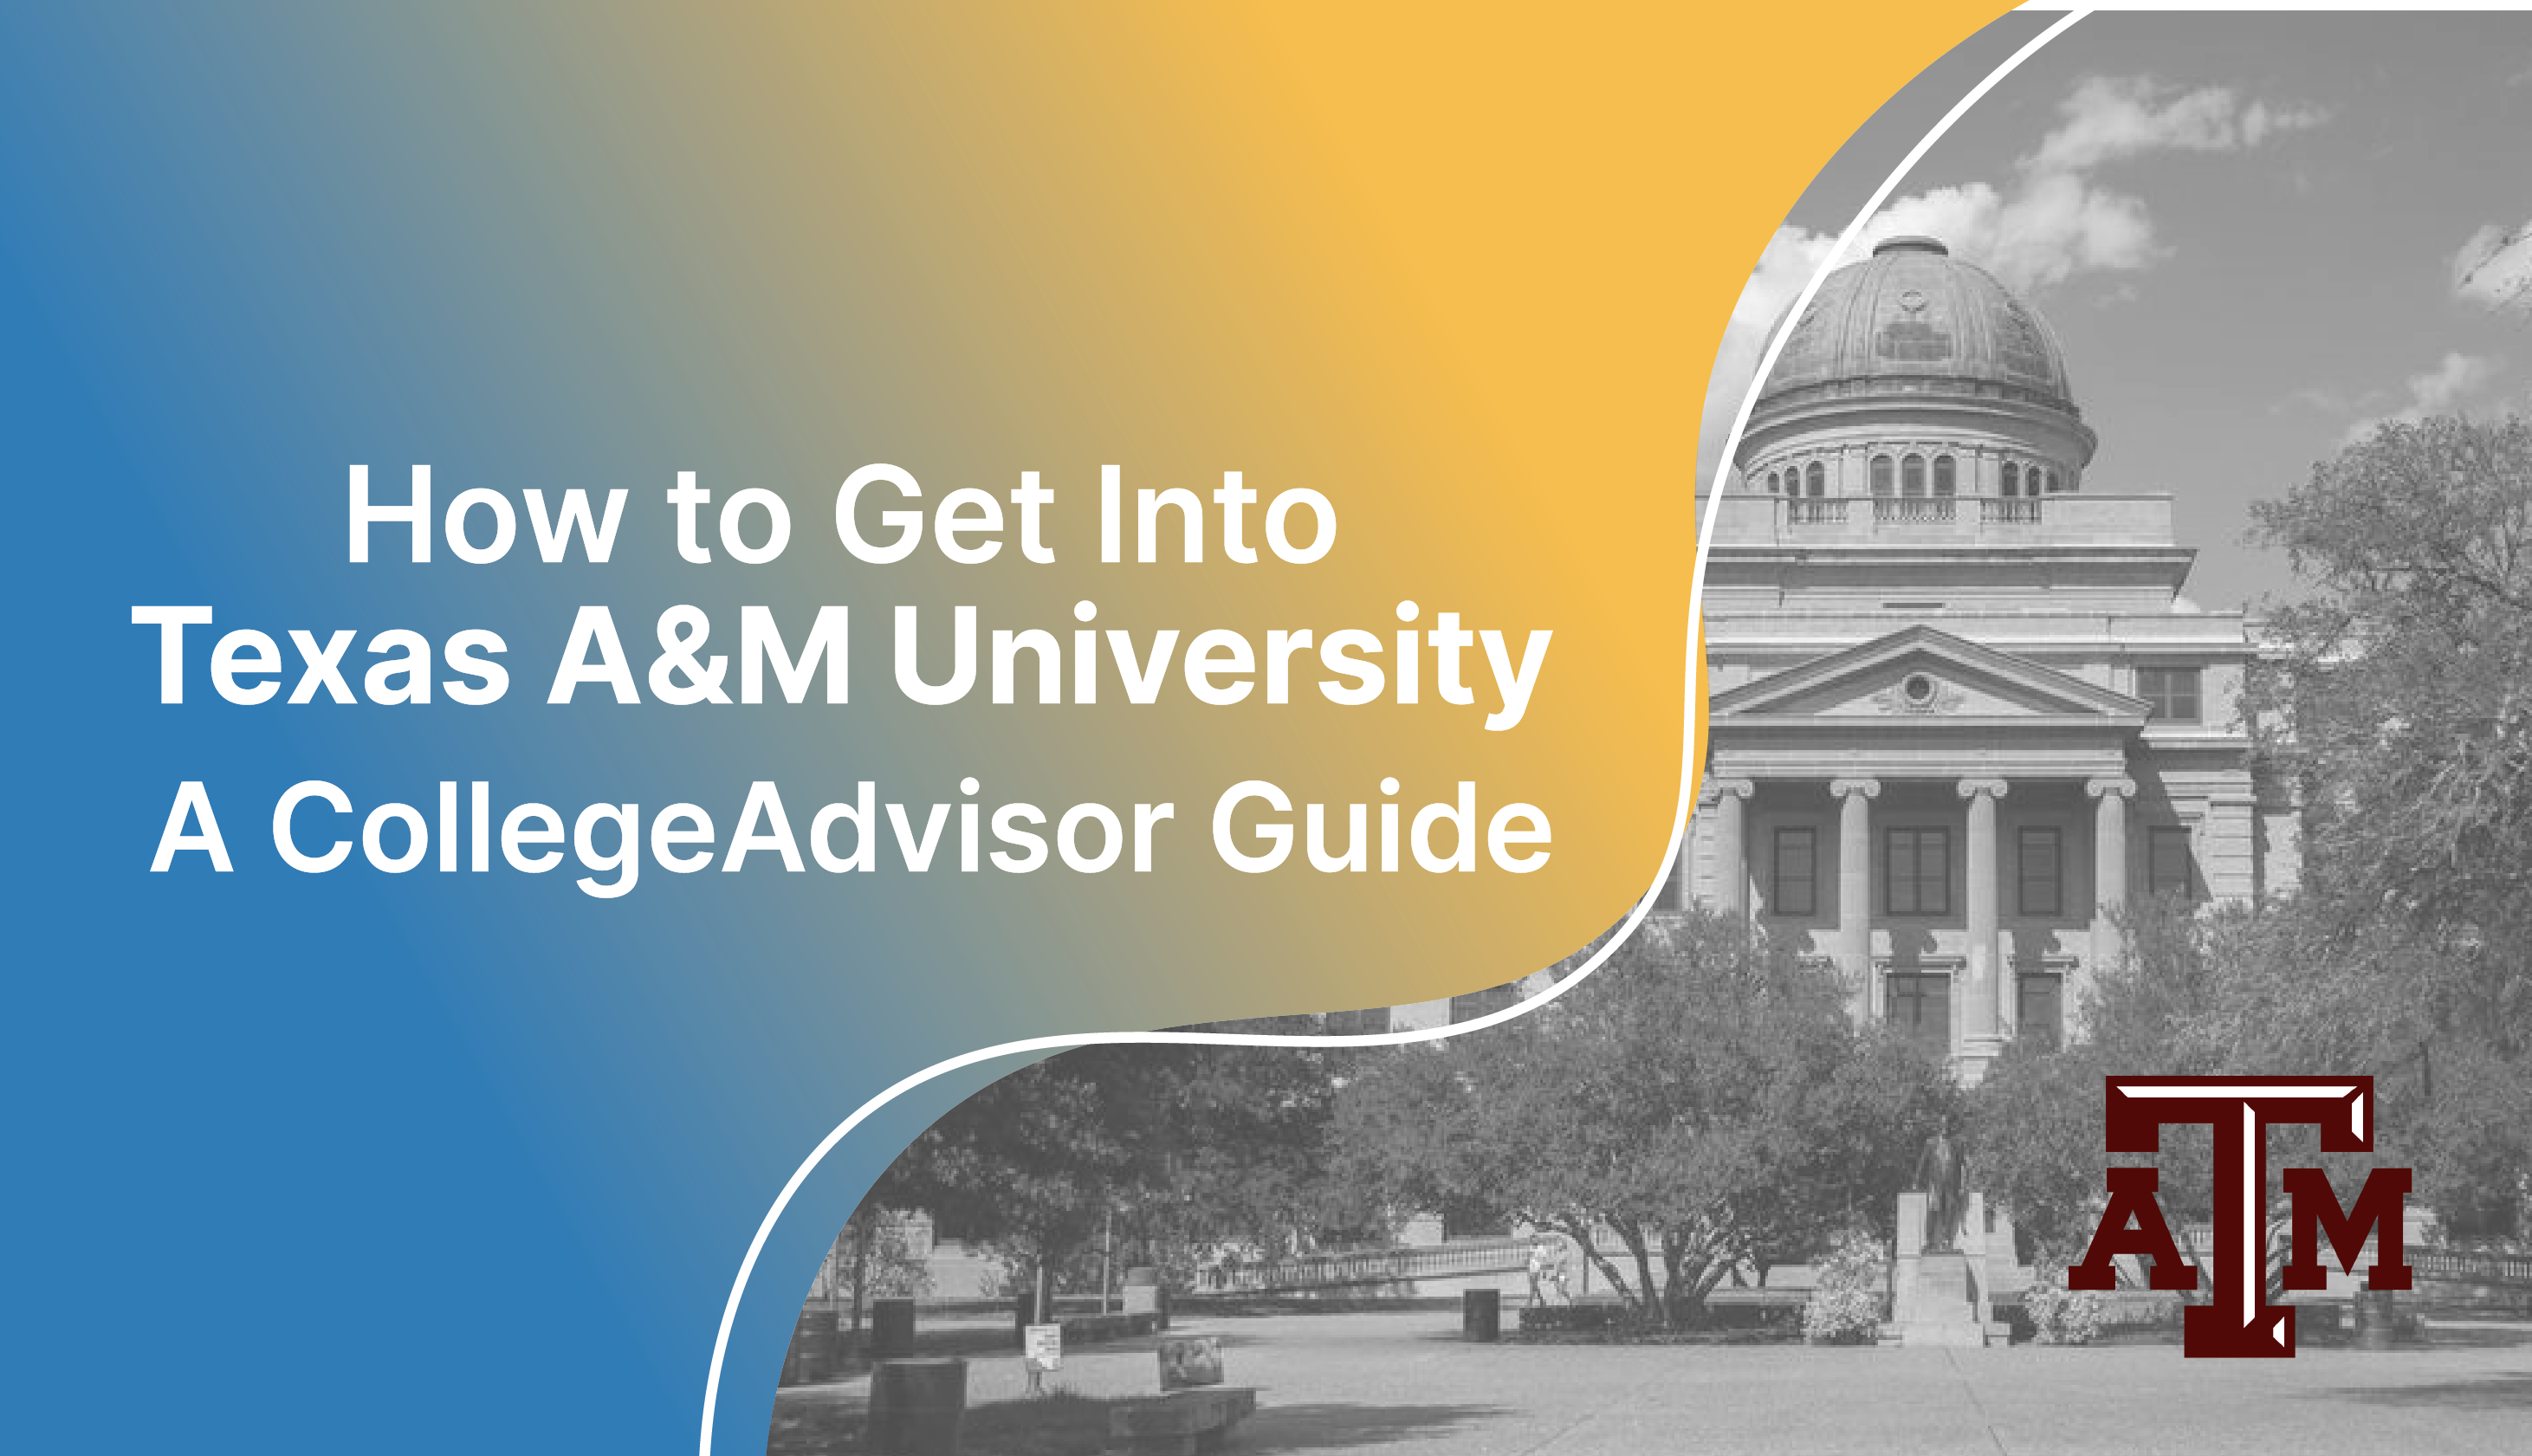 How to Get Into Texas A&M Guide